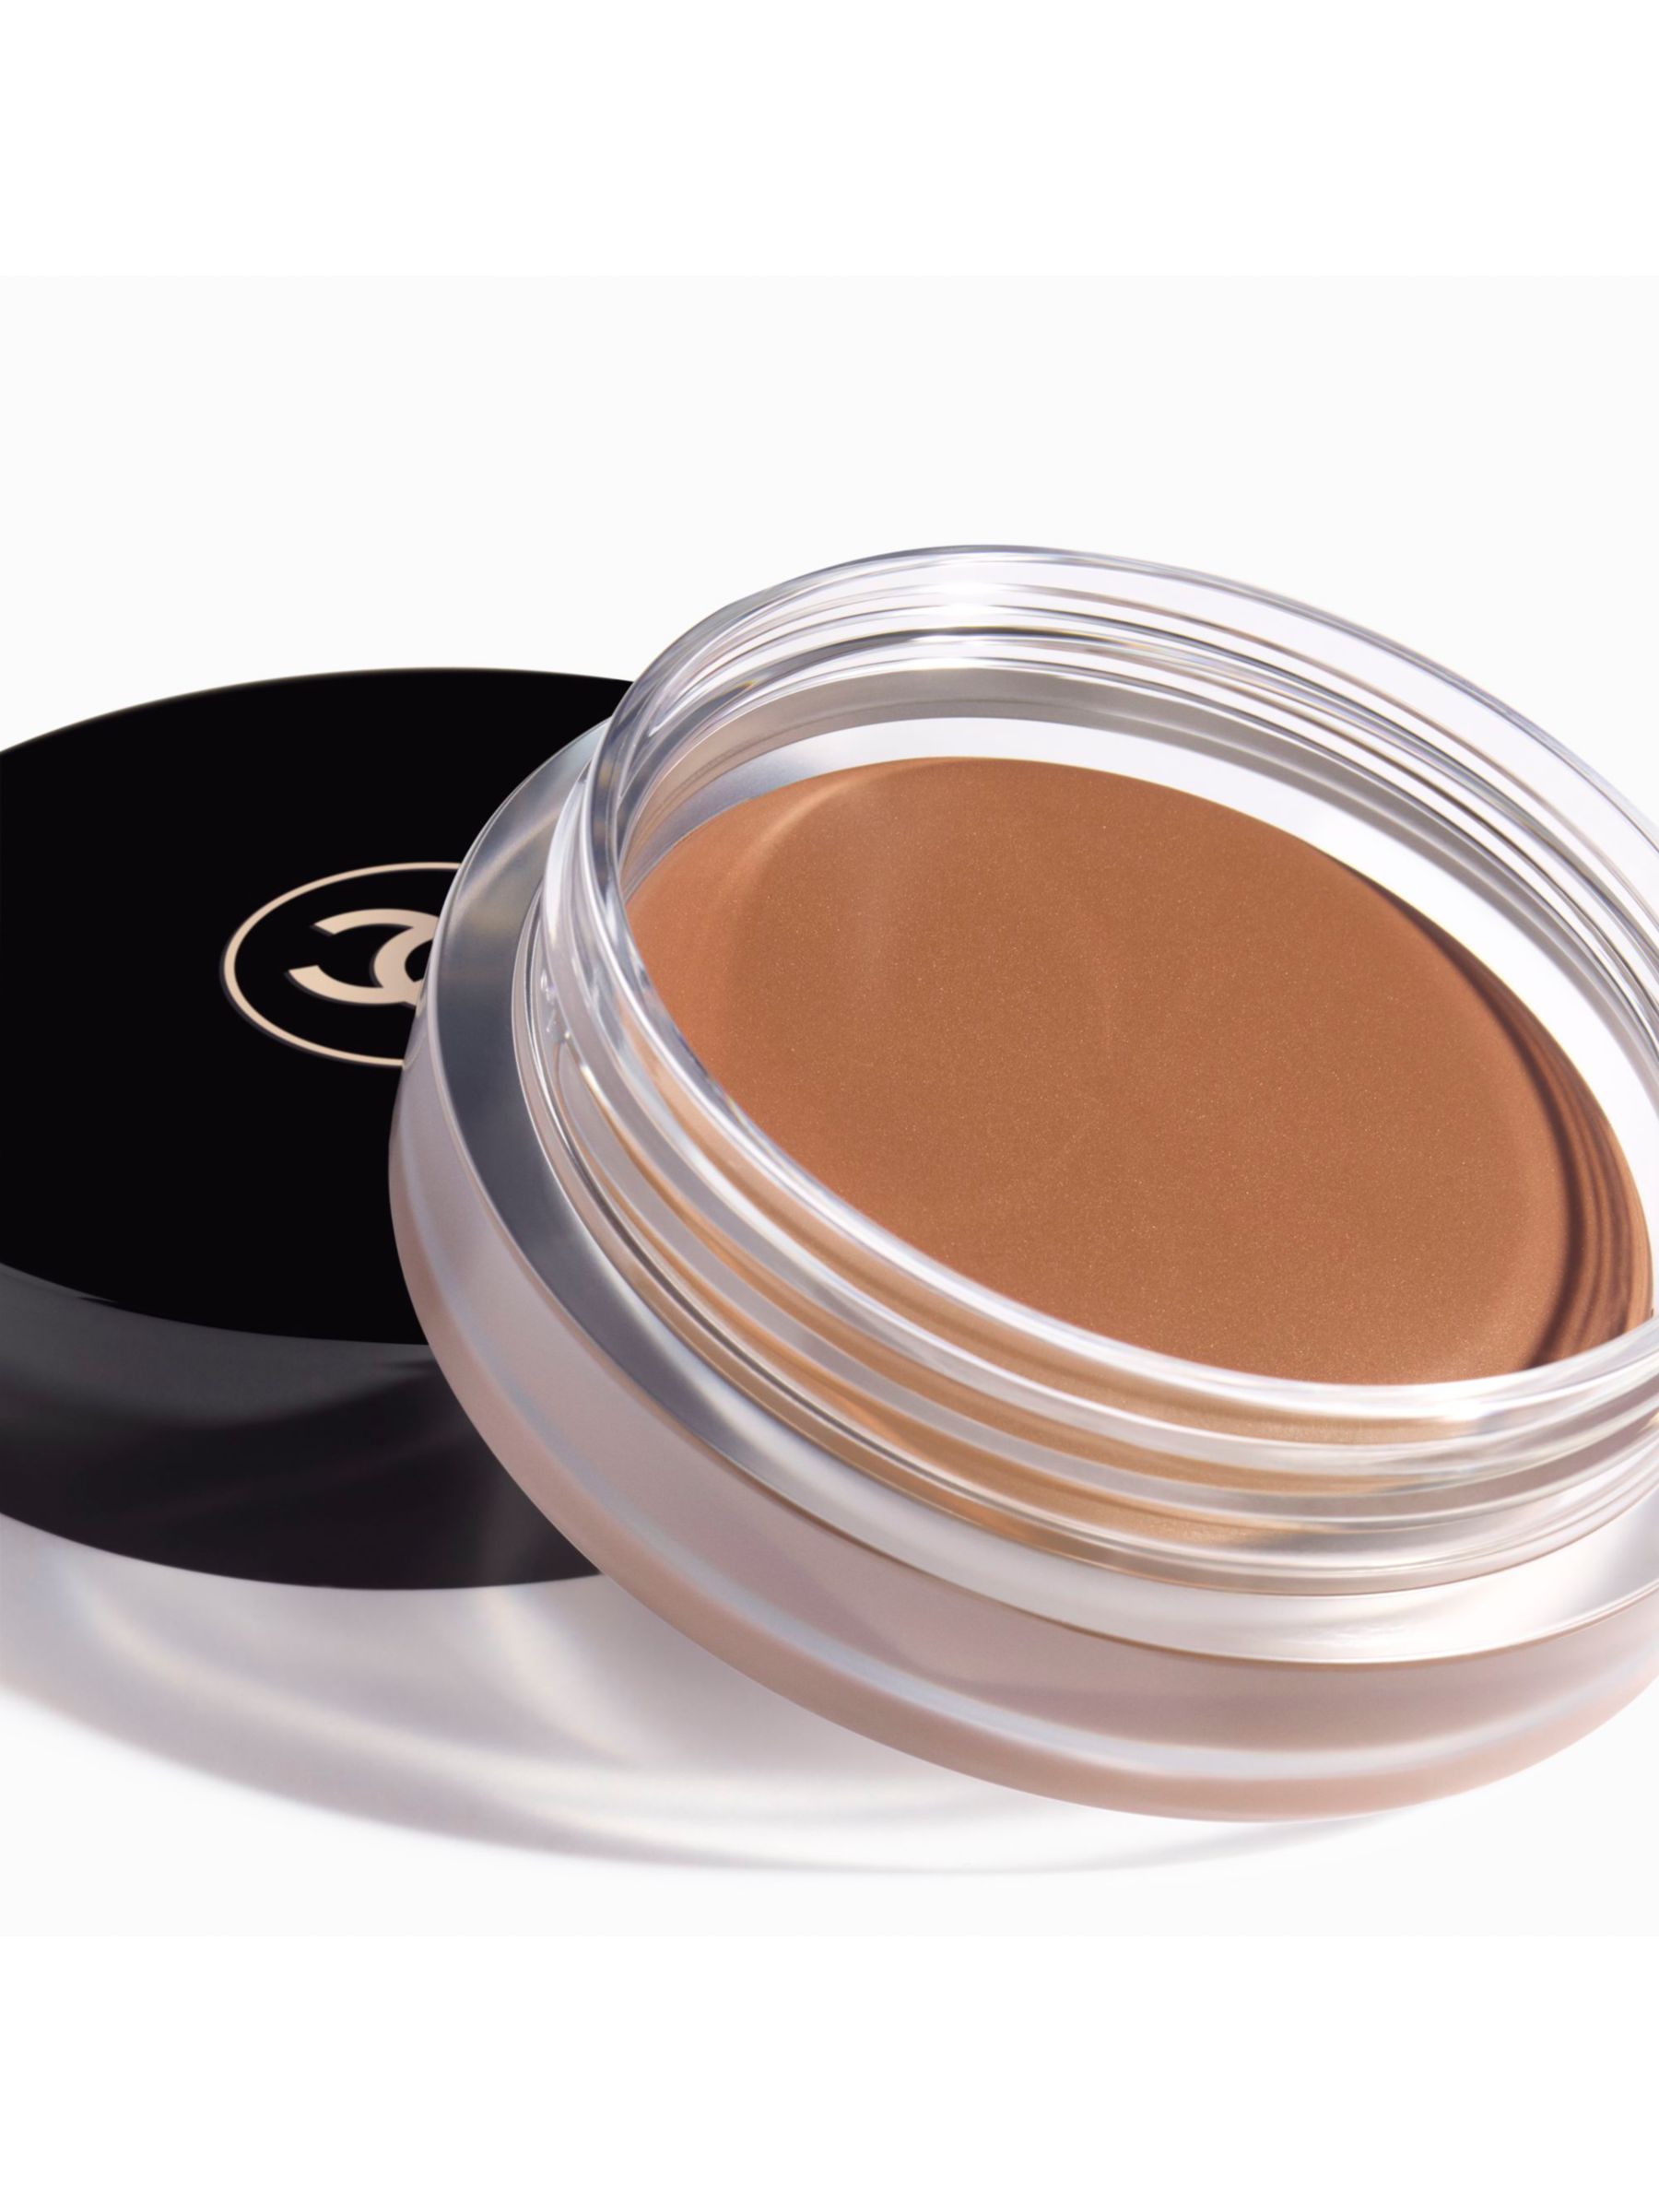 CHANEL LES BEIGES HEALTHY GLOW BRONZING CREAM REVIEW & SWATCH